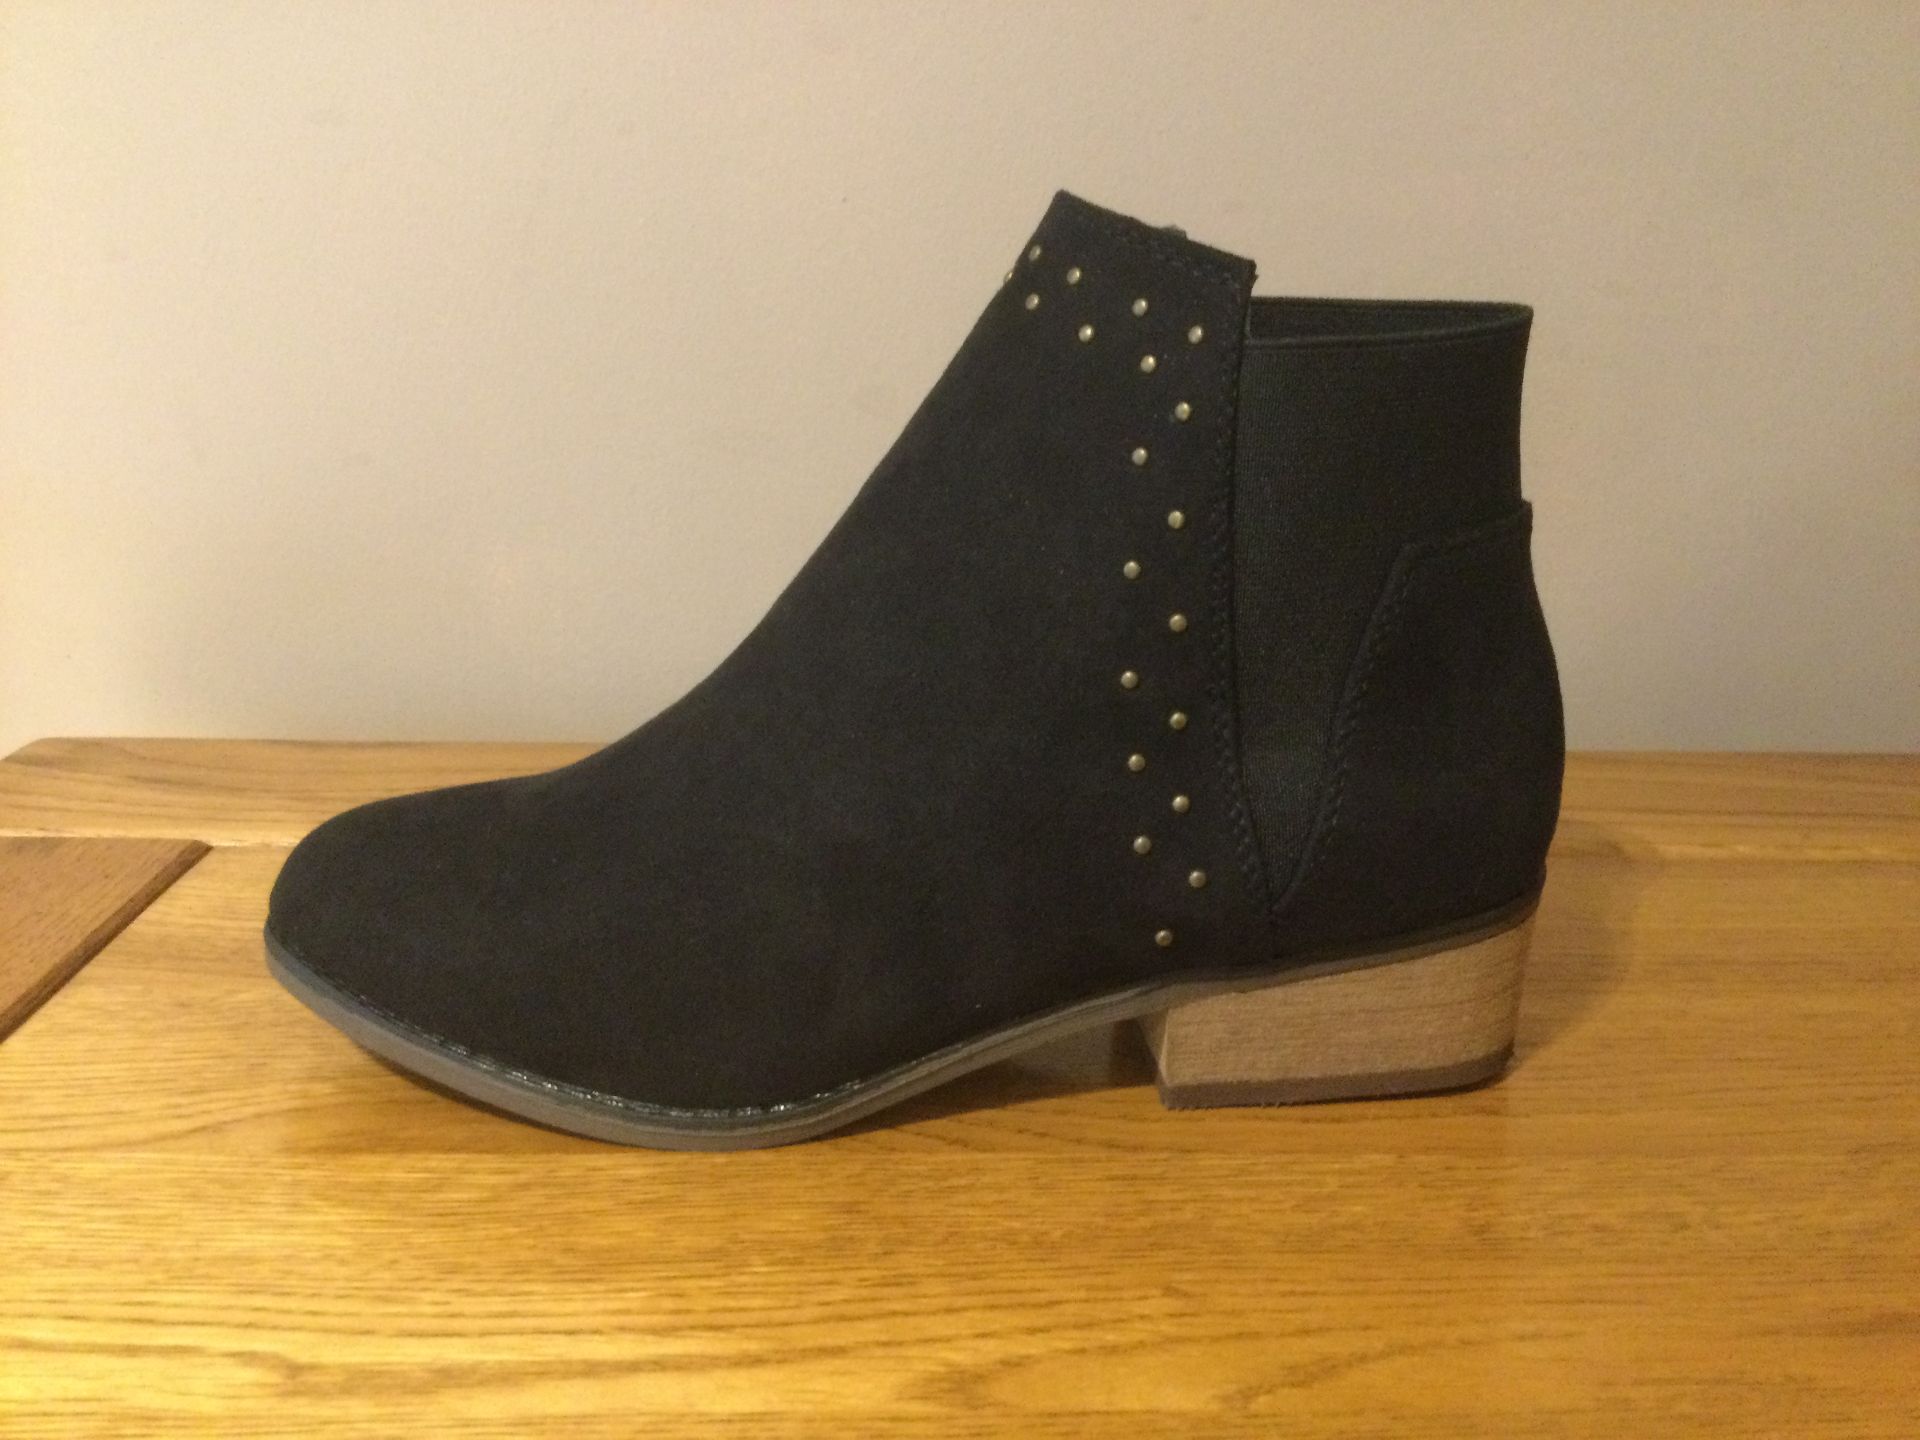 Dolcis “Wendy” Low Heel Ankle Boots, Size 6, Black - New RRP £45.99 - Image 4 of 7